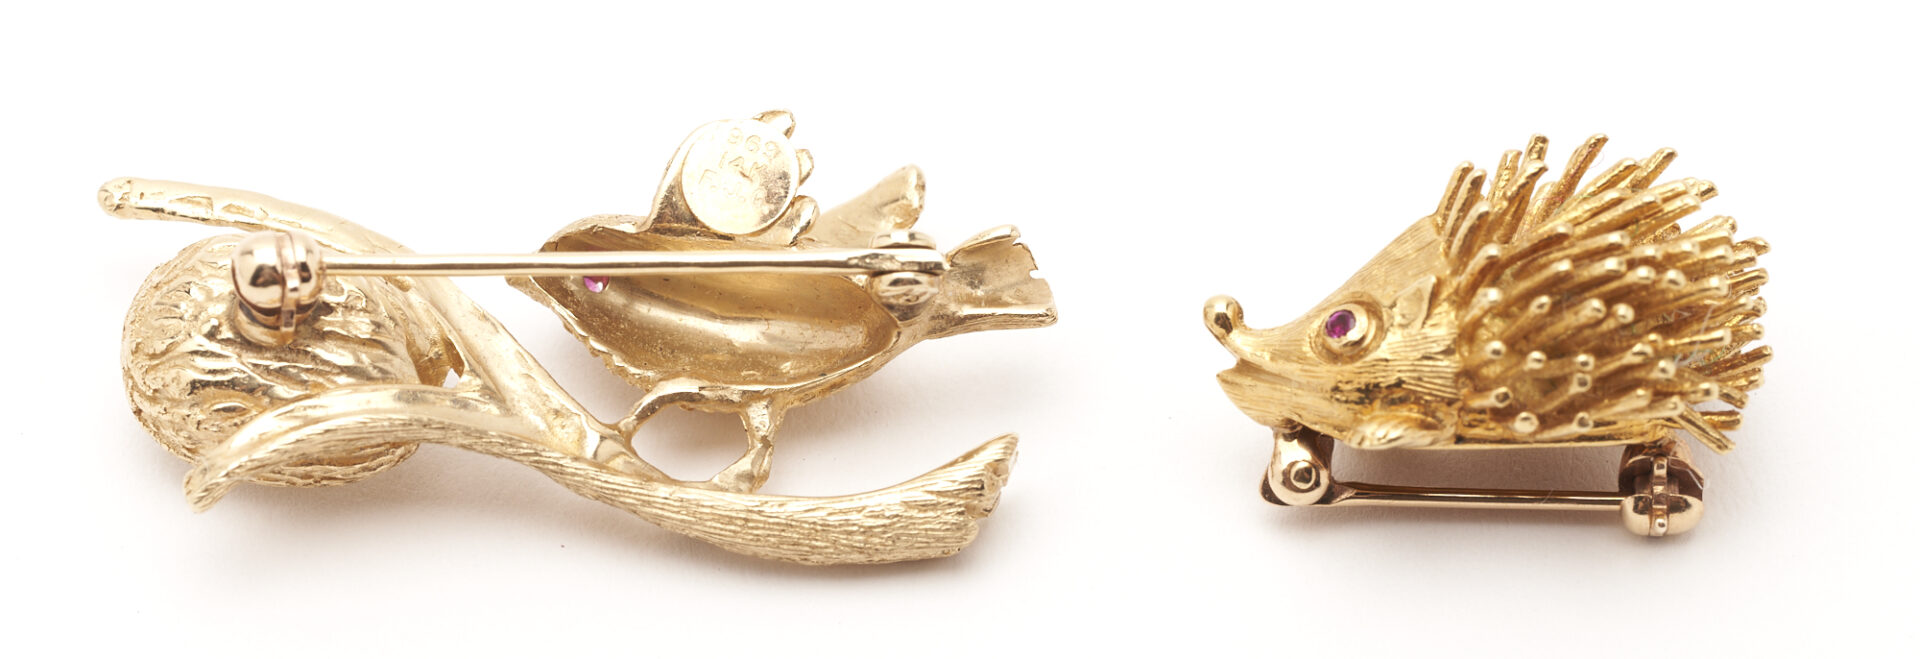 Lot 428: 2 Yellow Gold & Gemstone Bird and Hedgehog Brooches, 18K and 14K